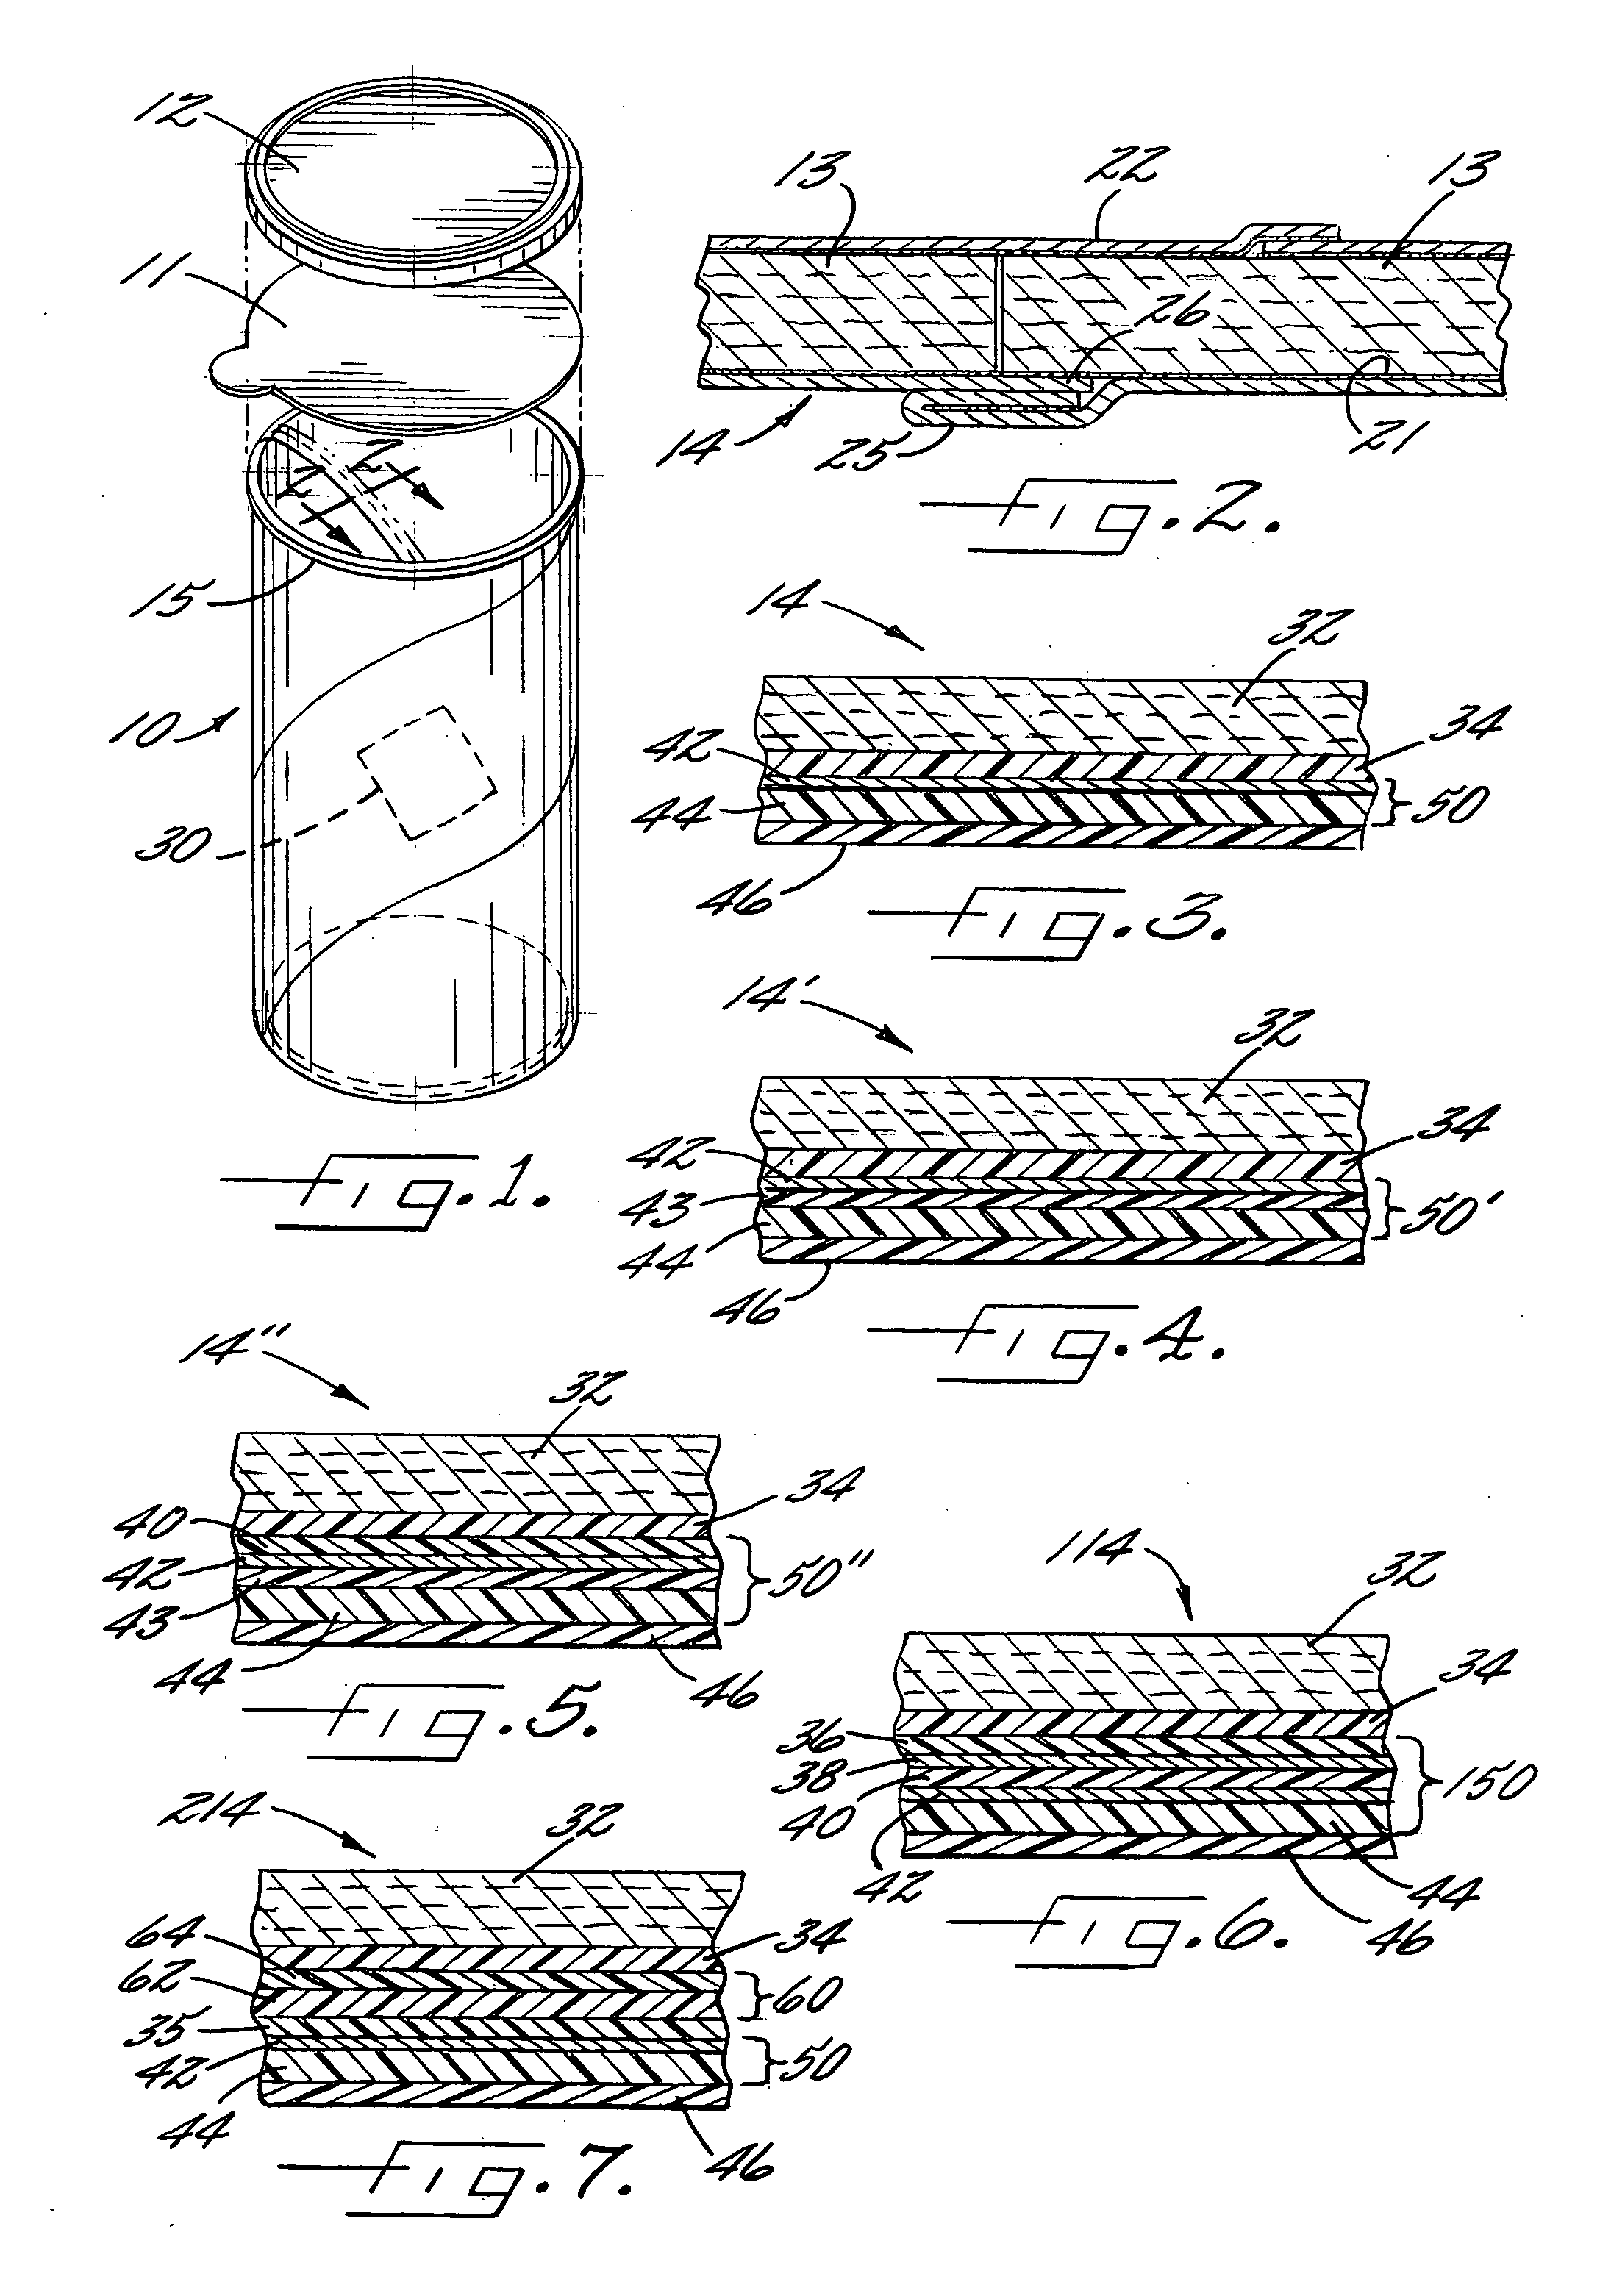 Composite container with RFID device and high-barrier liner